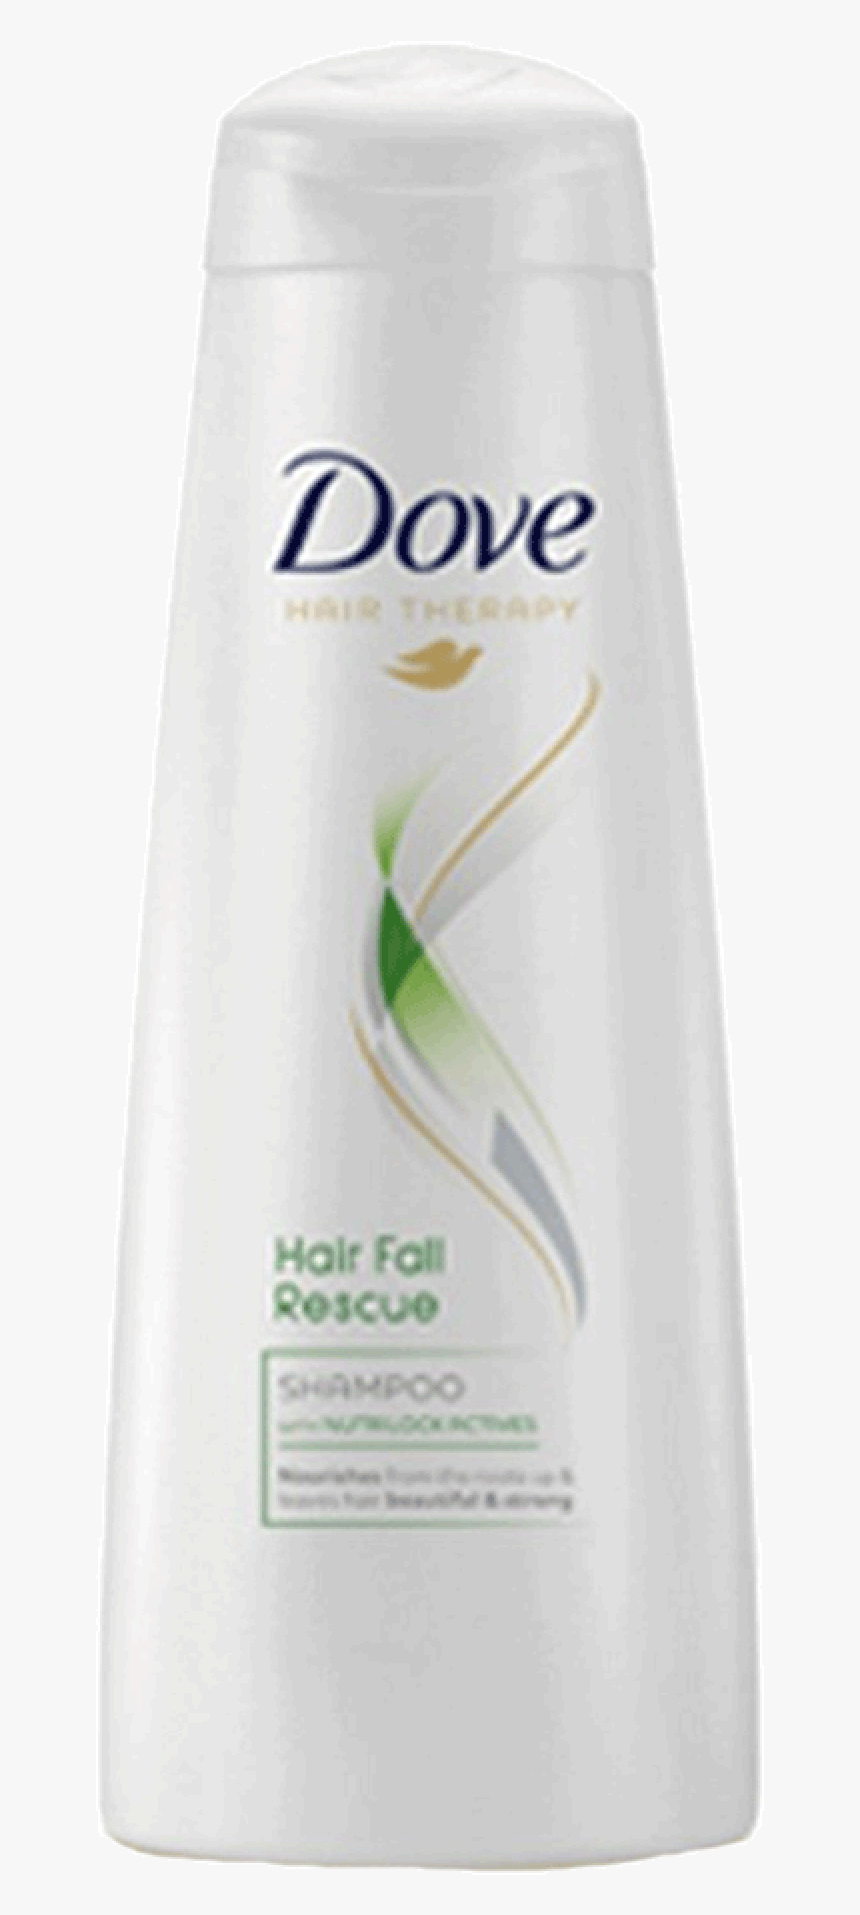 Dove Shampoo Hair Fall Rescue 700 Ml - Dove Straight And Silky Shampoo Review, HD Png Download, Free Download